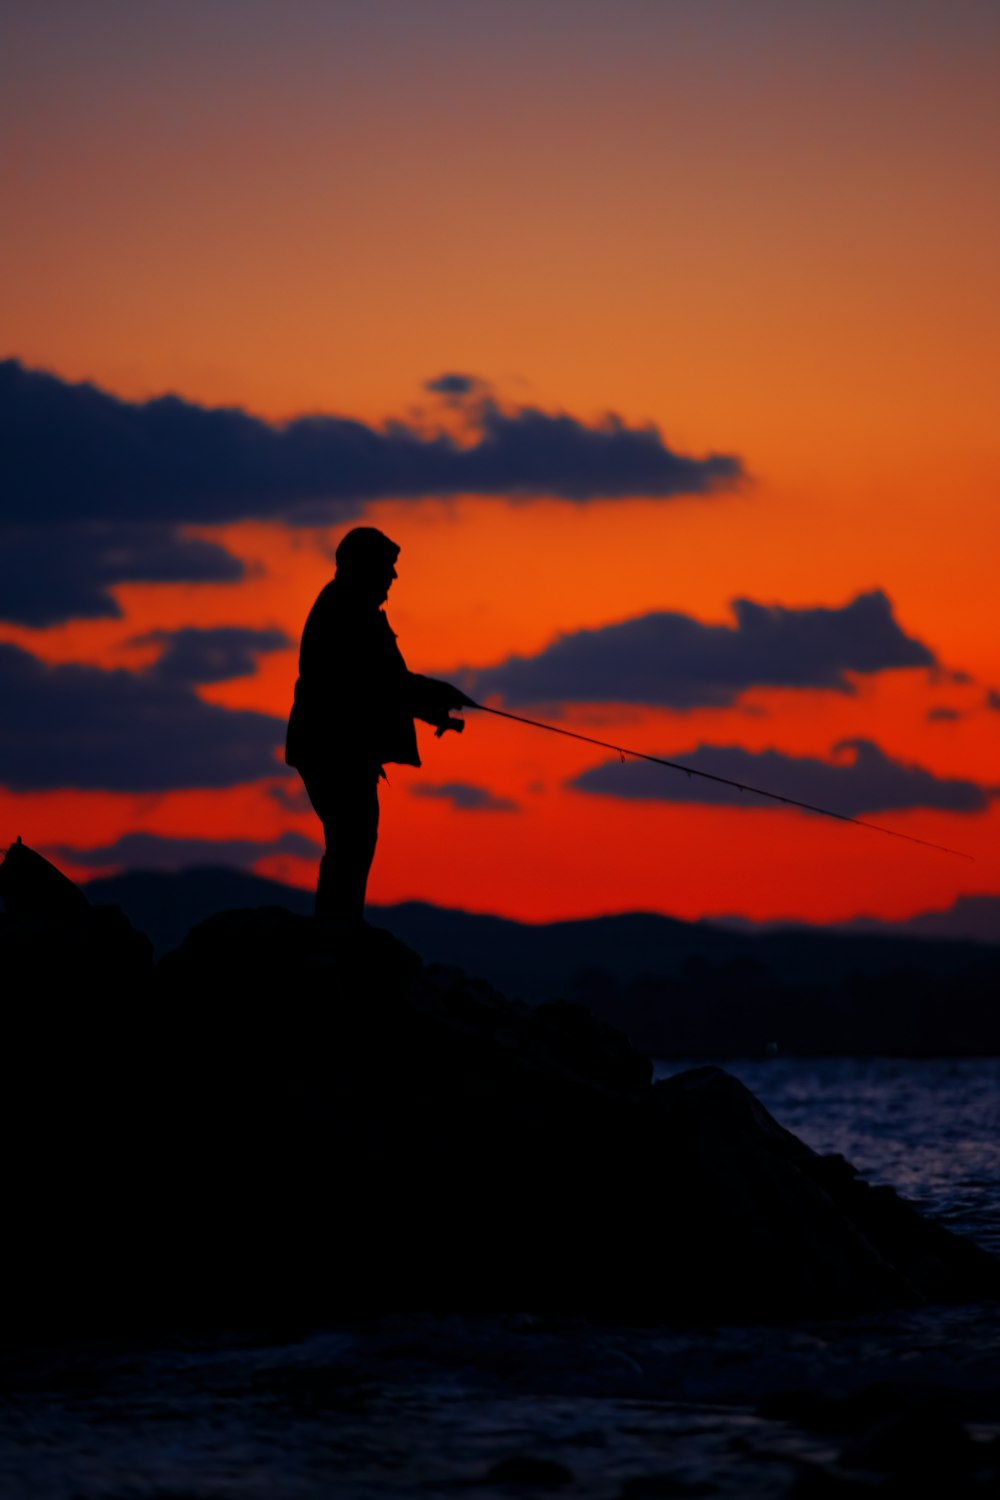 a silhouette of a man fishing at sunset